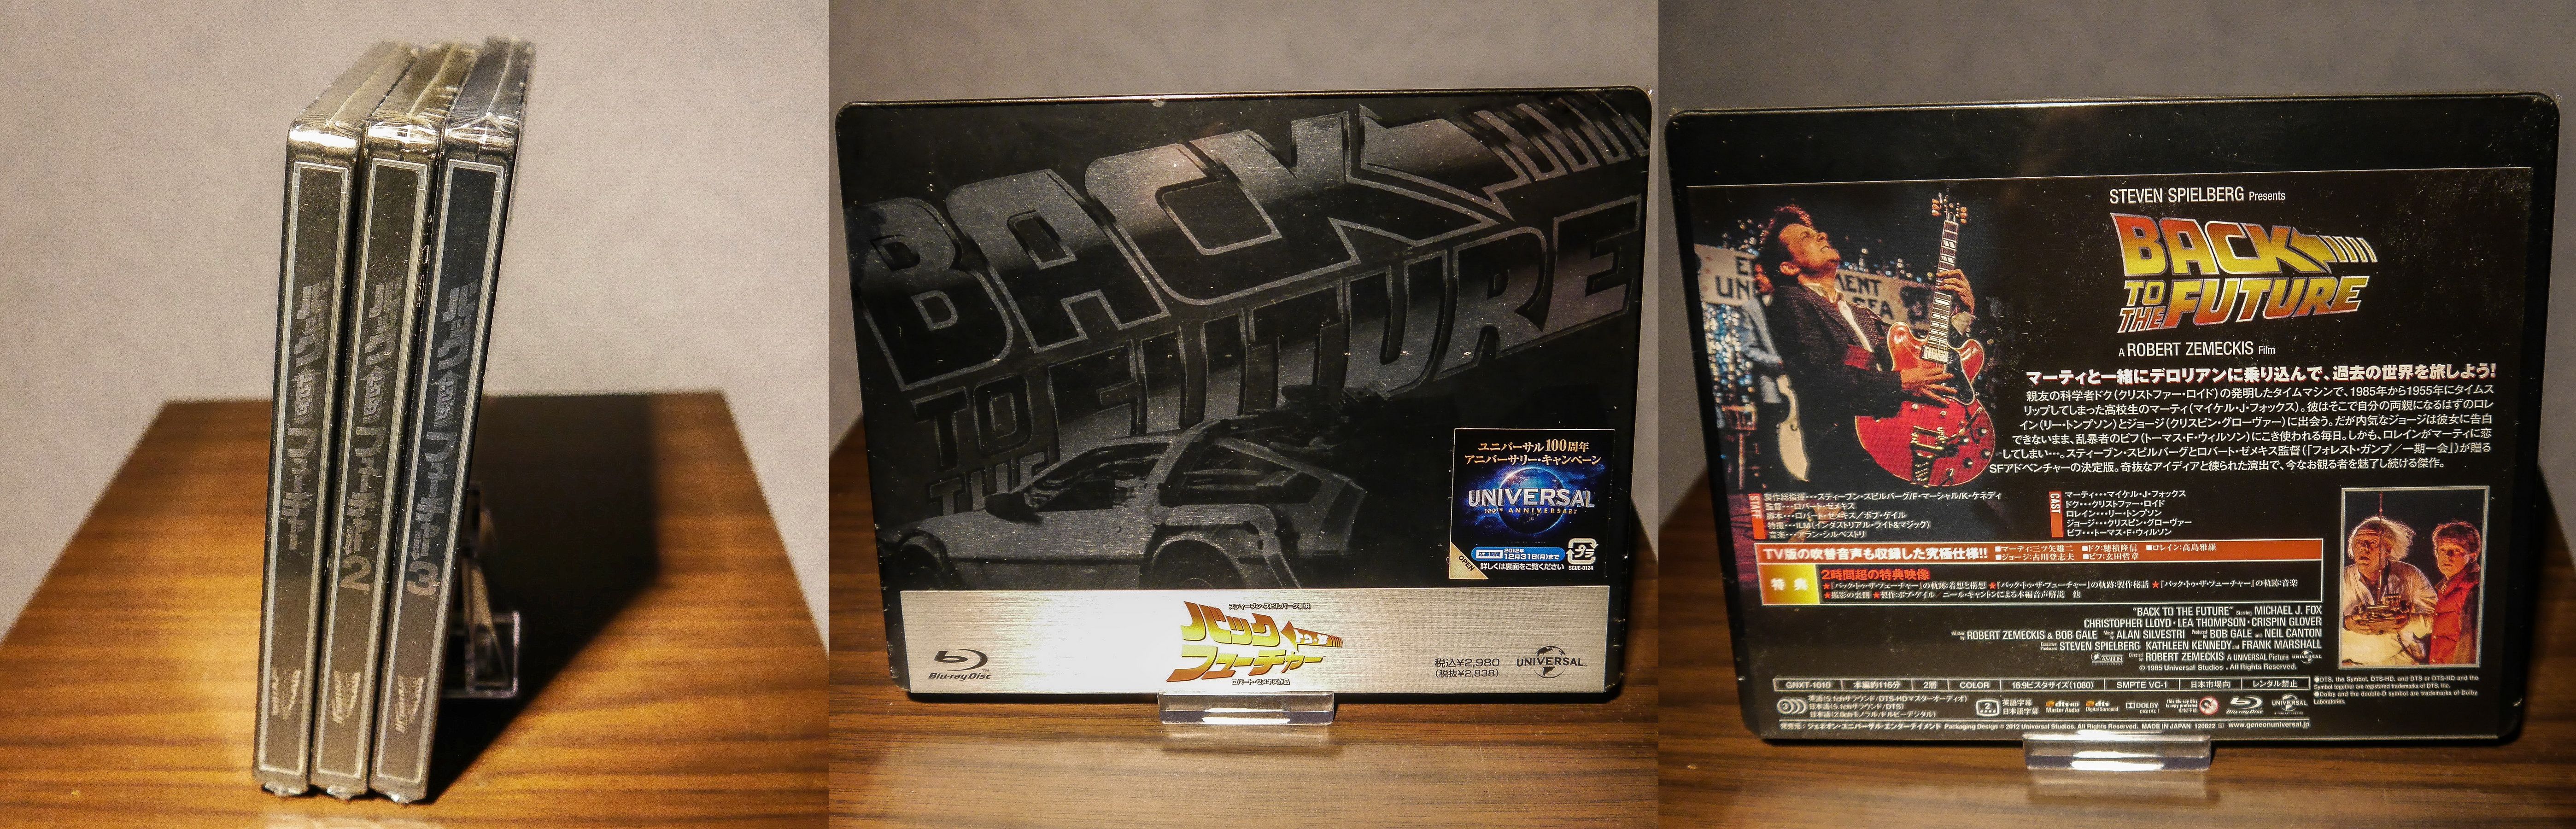 Back to the Future Bluray Steelbook Japan Part I